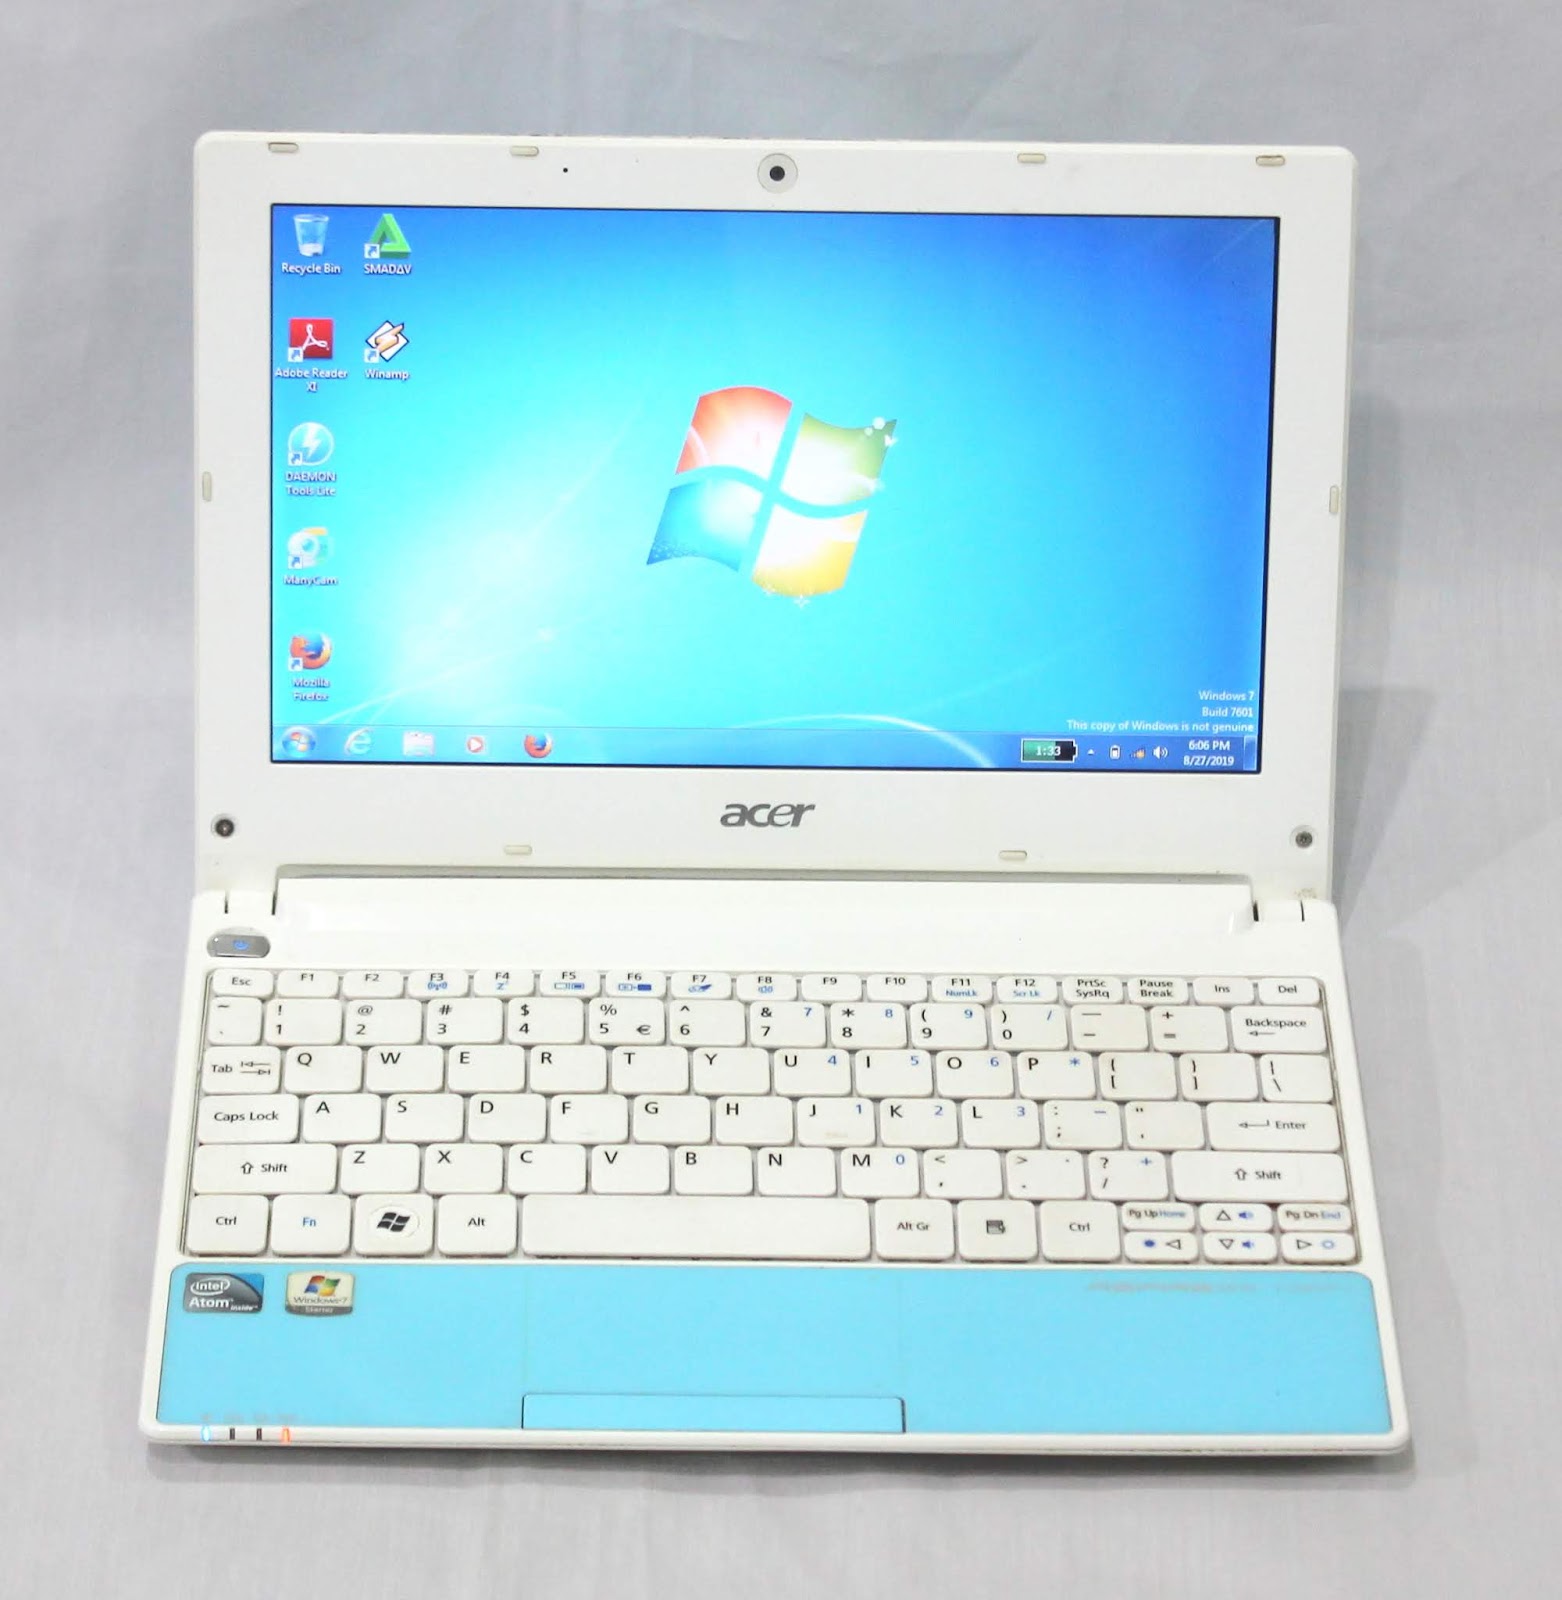 Aspire happy. Ноутбук Acer Aspire one Happy. Acer Aspire one Happy 2. Acer Aspire one Happy 2 матрица. Acer Note book sf1454.